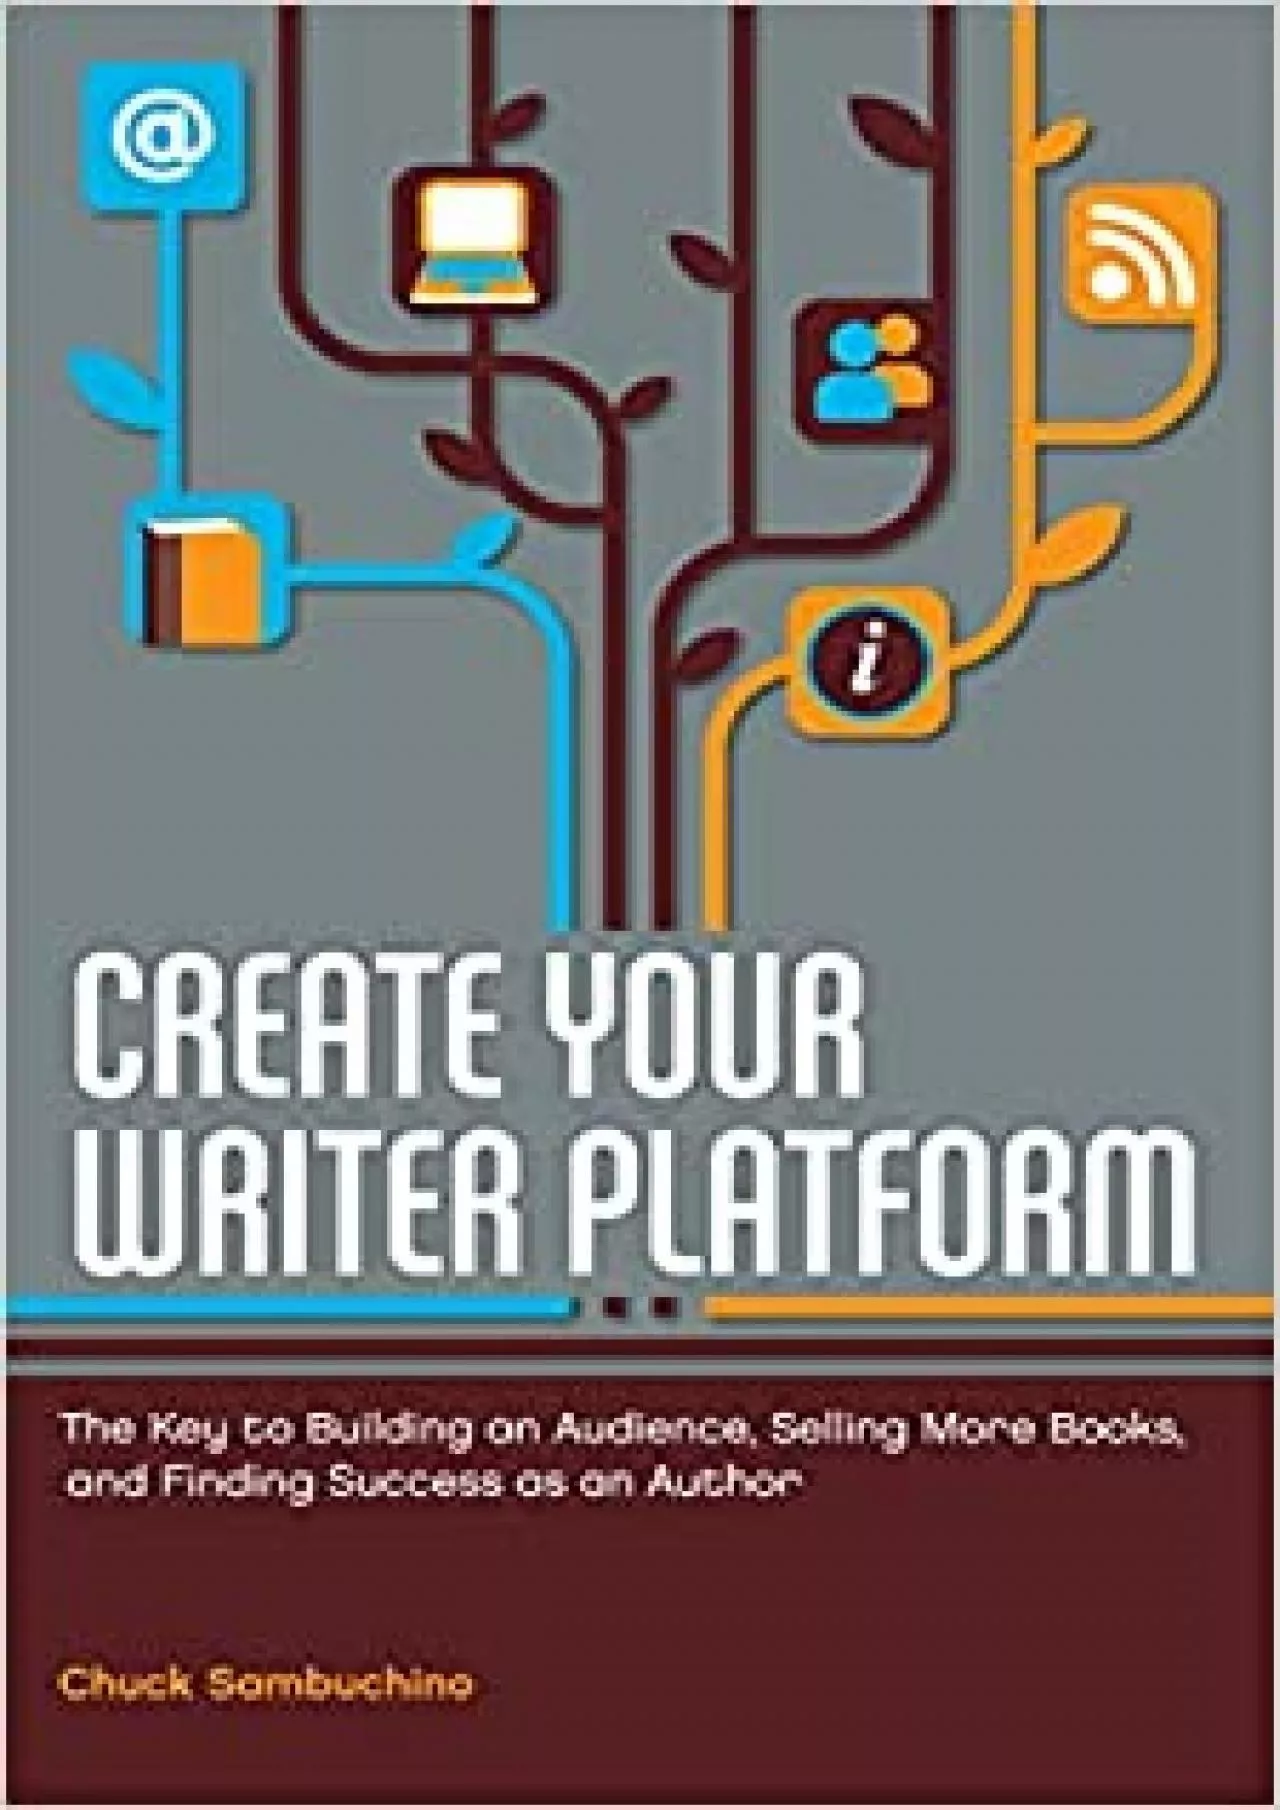 Create Your Writer Platform: The Key to Building an Audience, Selling More Books, and